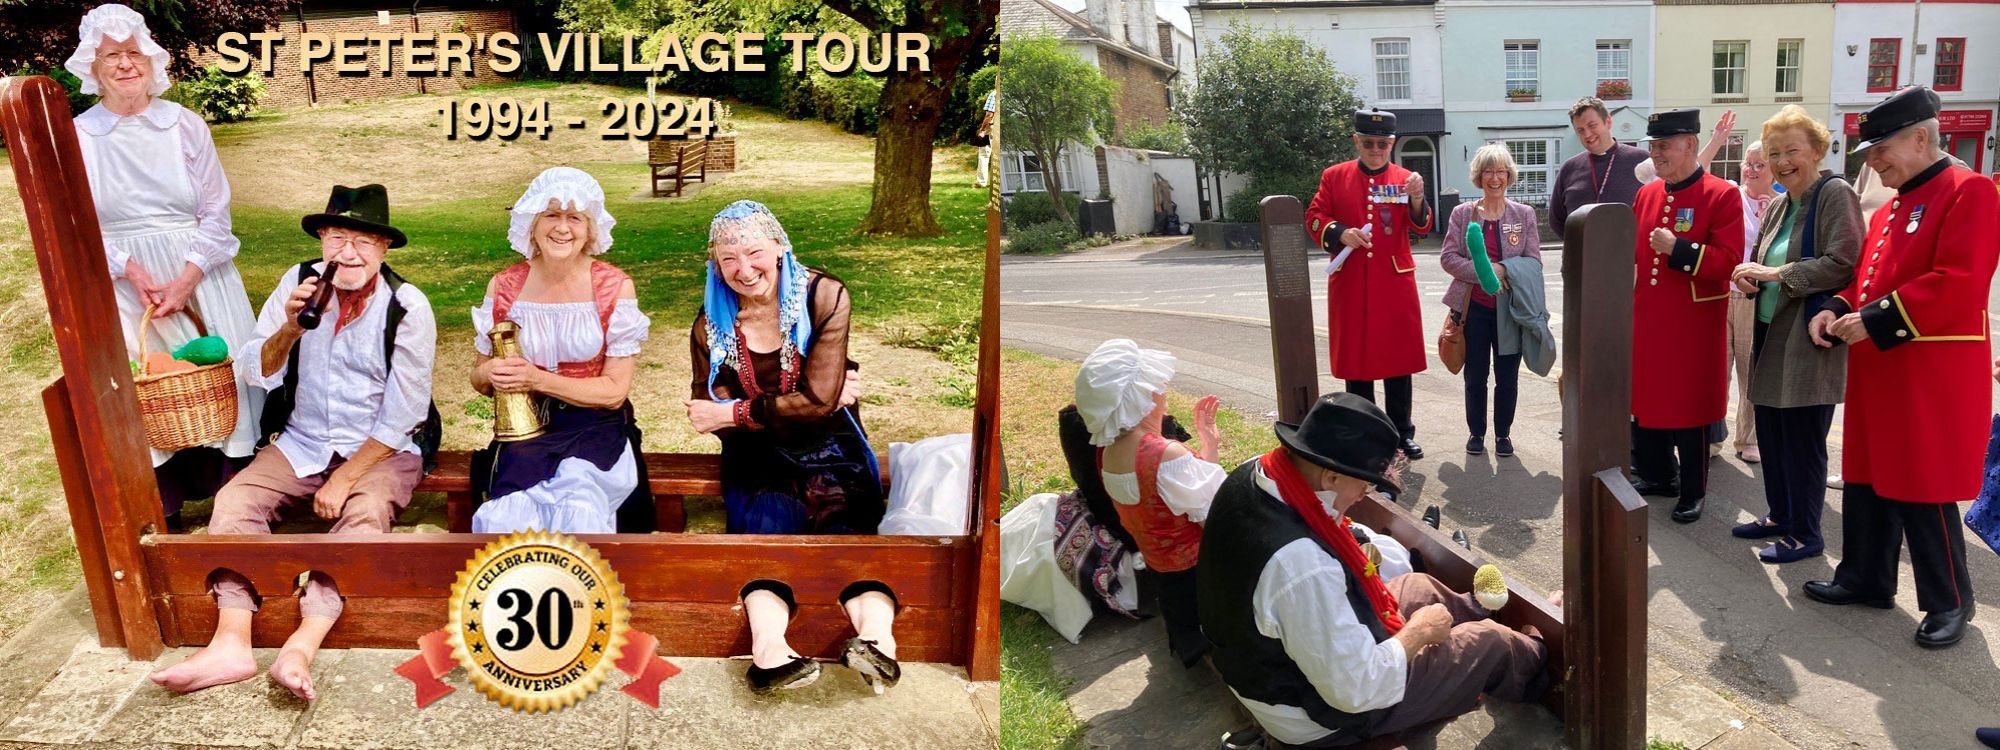 30th Anniversary Celebrations - St Peter’s Village Tour celebrated their 30th Anniversary on Thursday 13th June 2024.